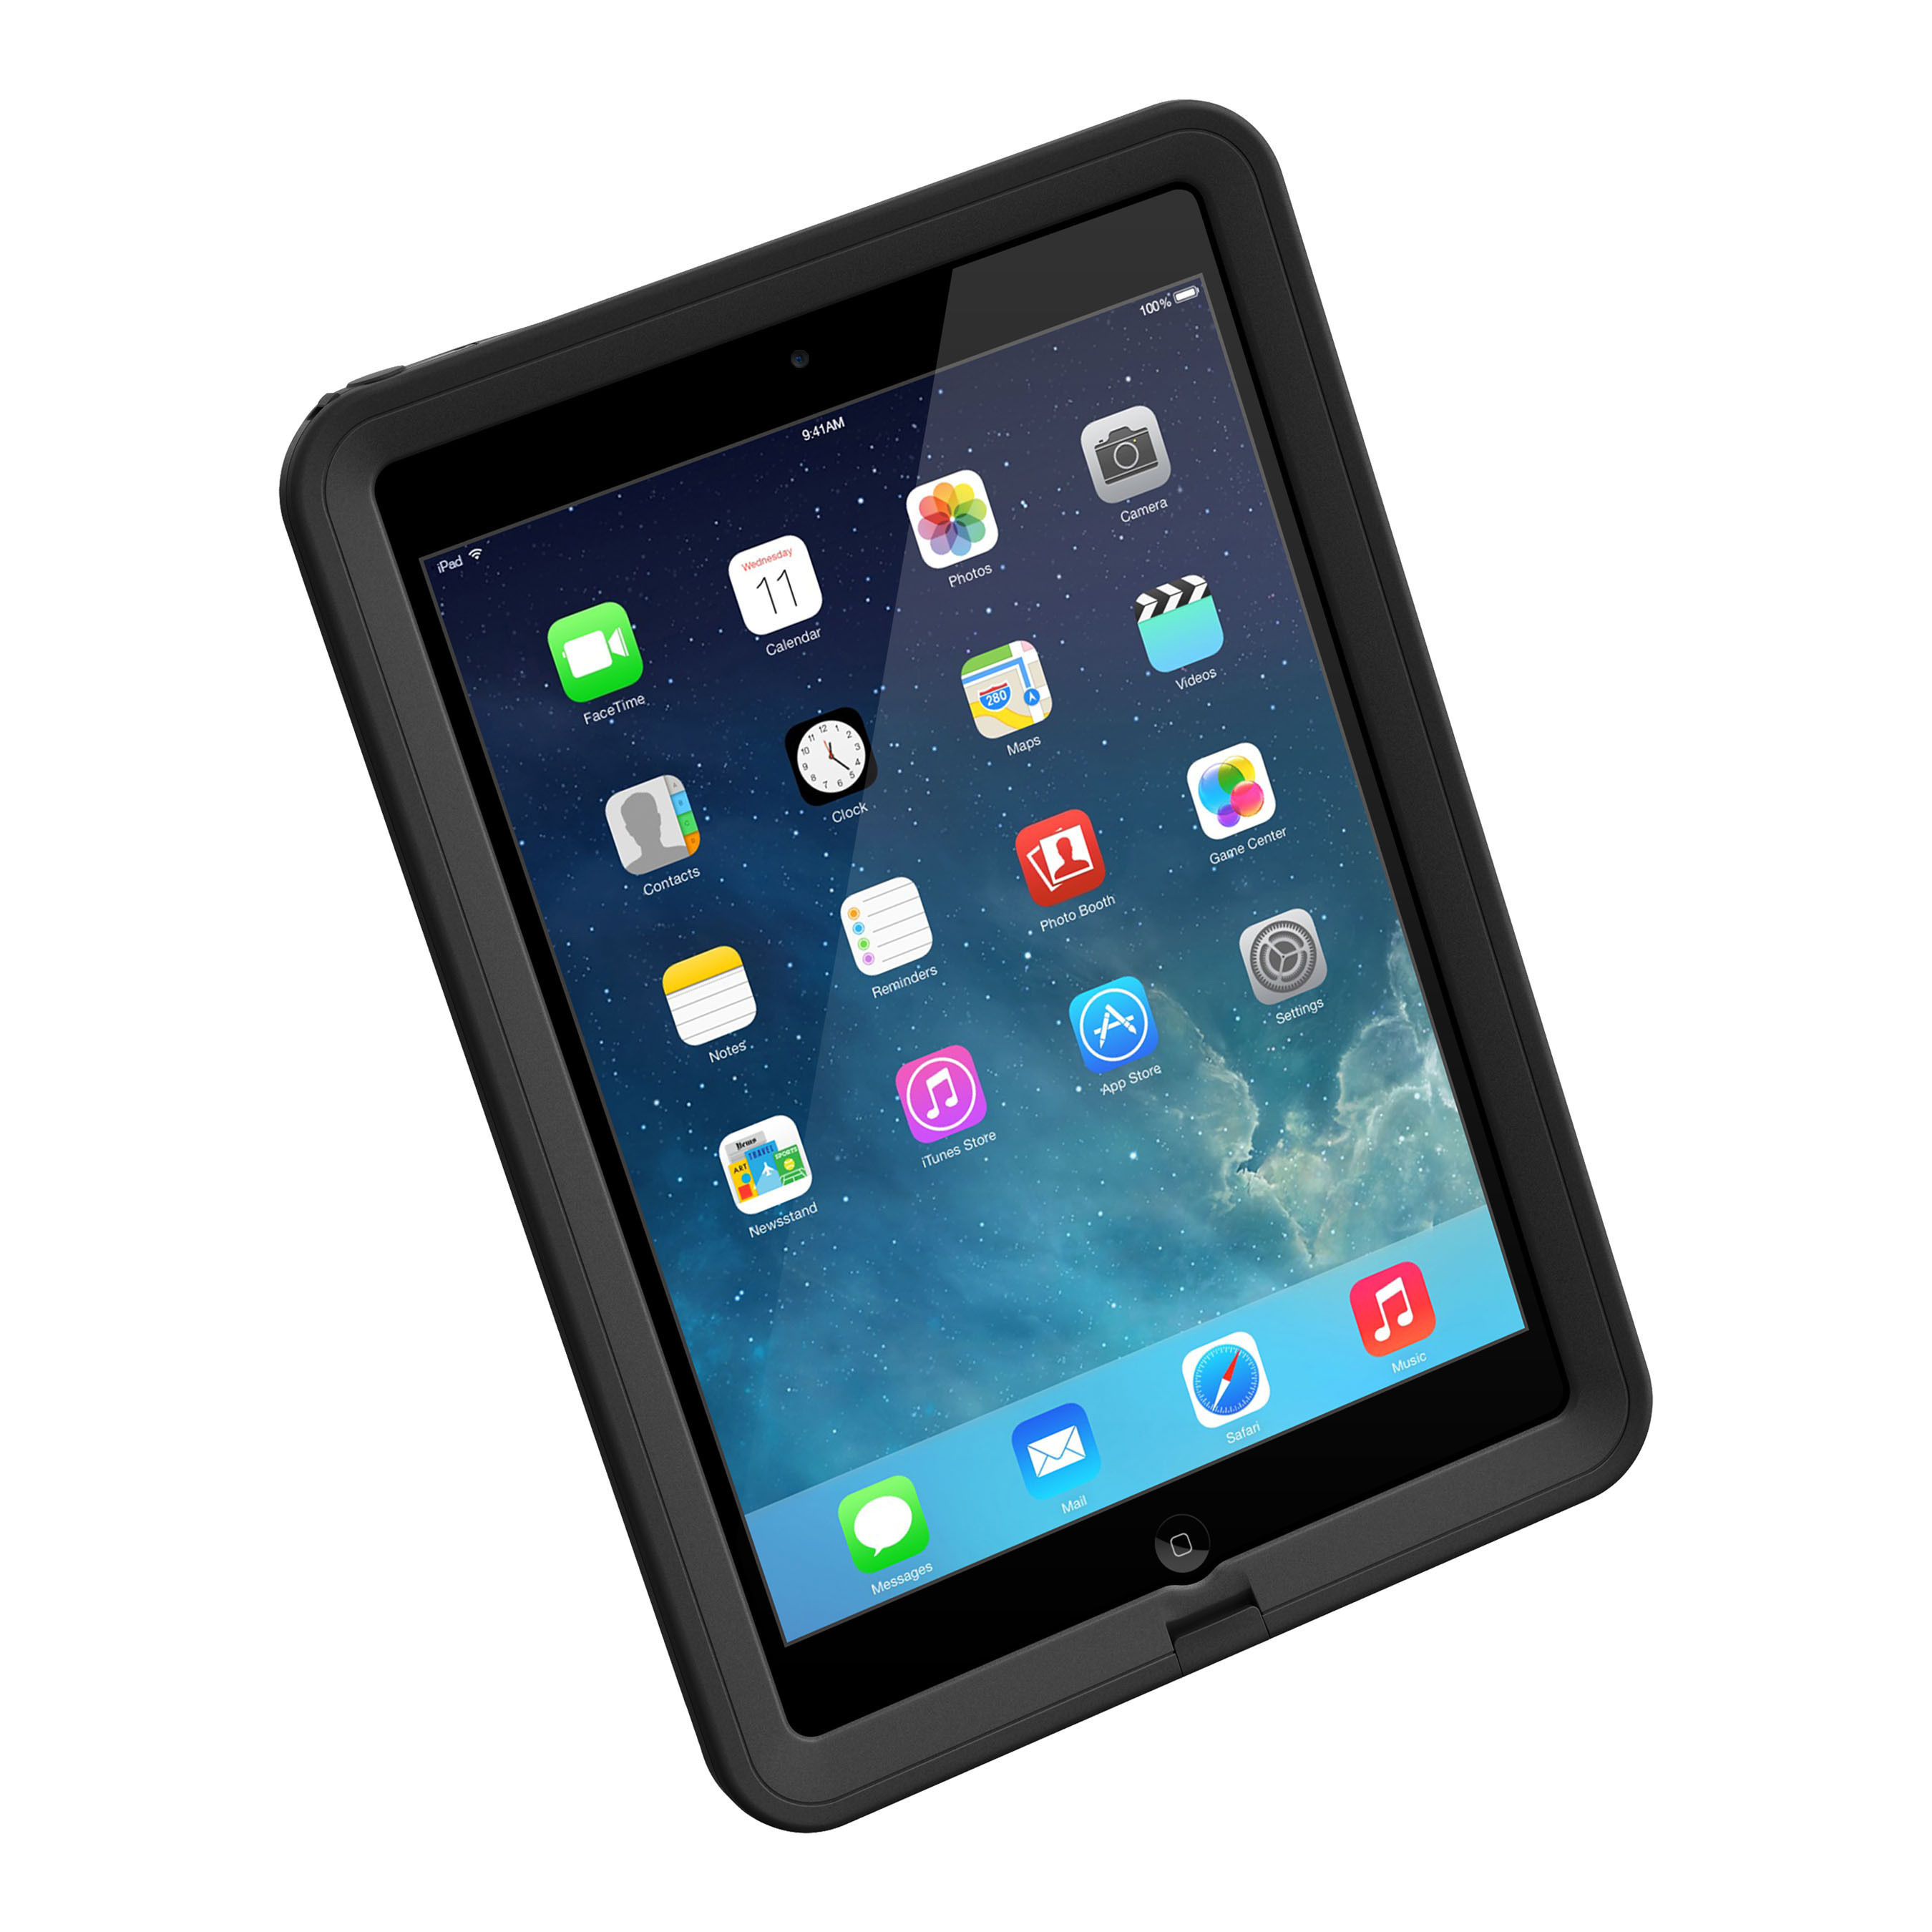 The LifeProof fre for iPad Air is available now in black and white. The waterproof iPad Air case includes a tethered headphone jack cover and is compatible with a variety of LifeProof accessories, including a folio screen cover that doubles as a stand, a floating LifeJacket and a mounting cradle. (PRNewsFoto/LifeProof) (PRNewsFoto/LIFEPROOF)